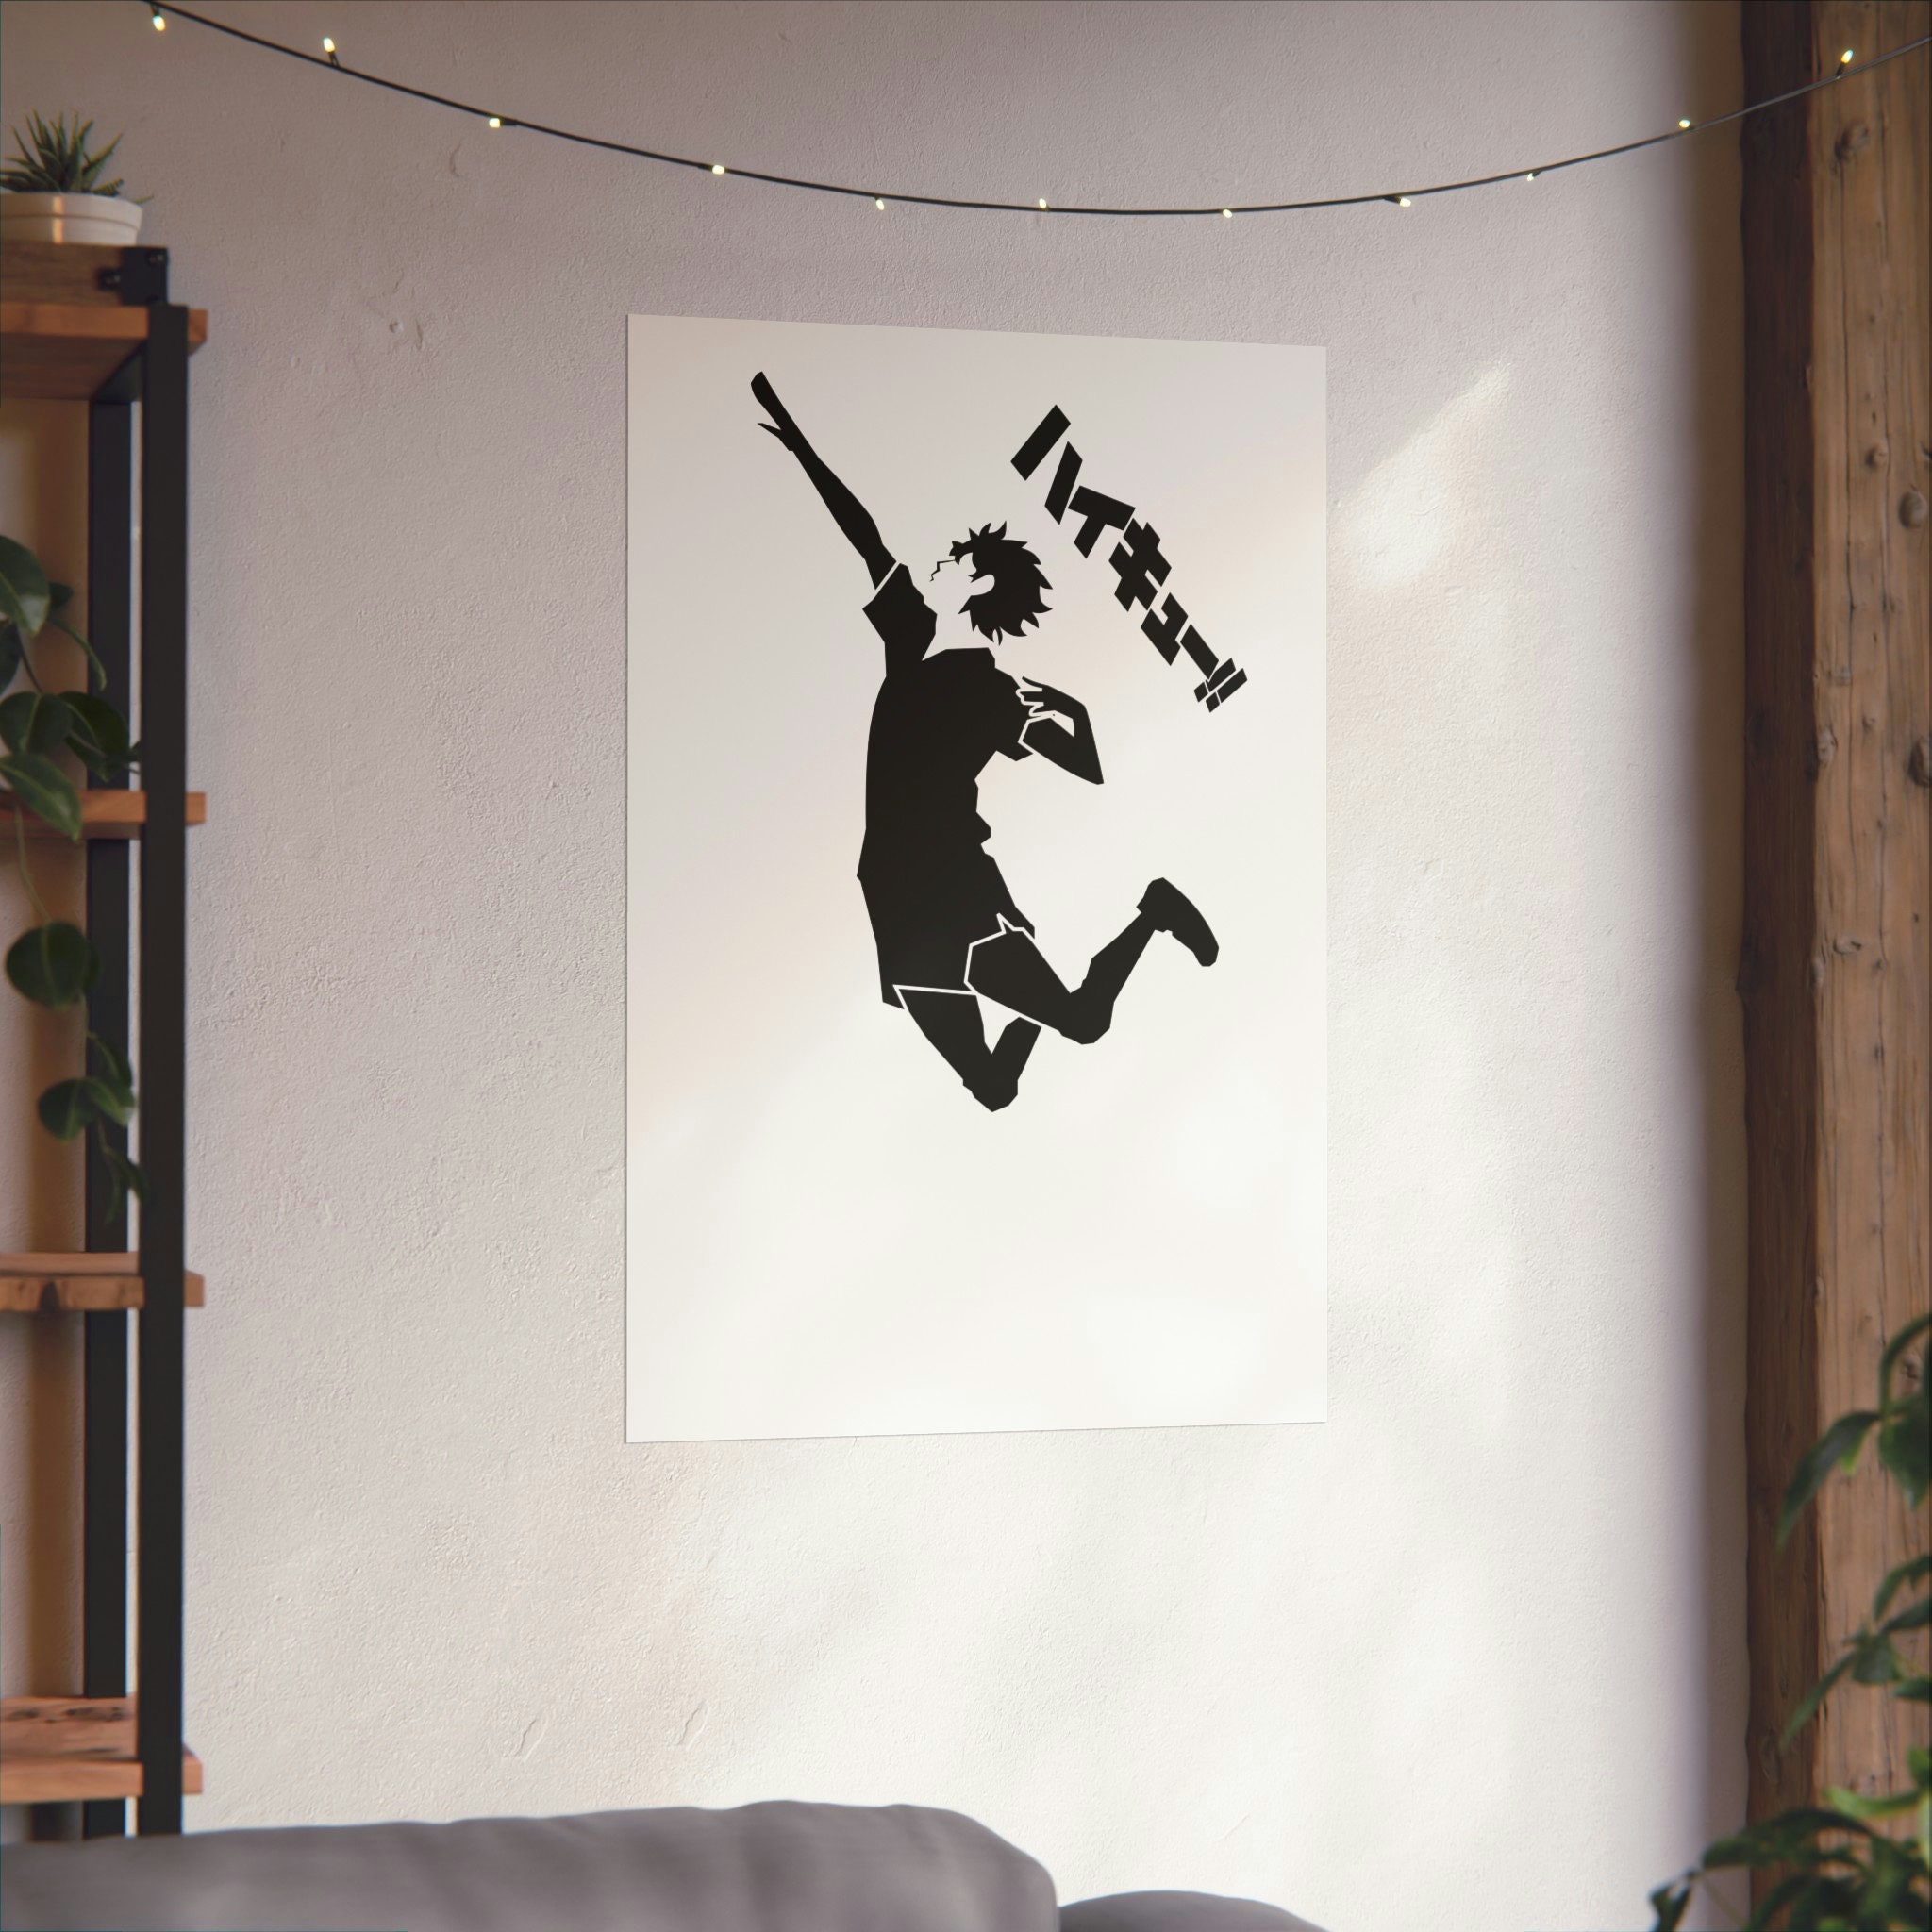 Buy Haikyuu!! All Characters Premium Wall Poster Stickers (45+ Designs) -  Posters